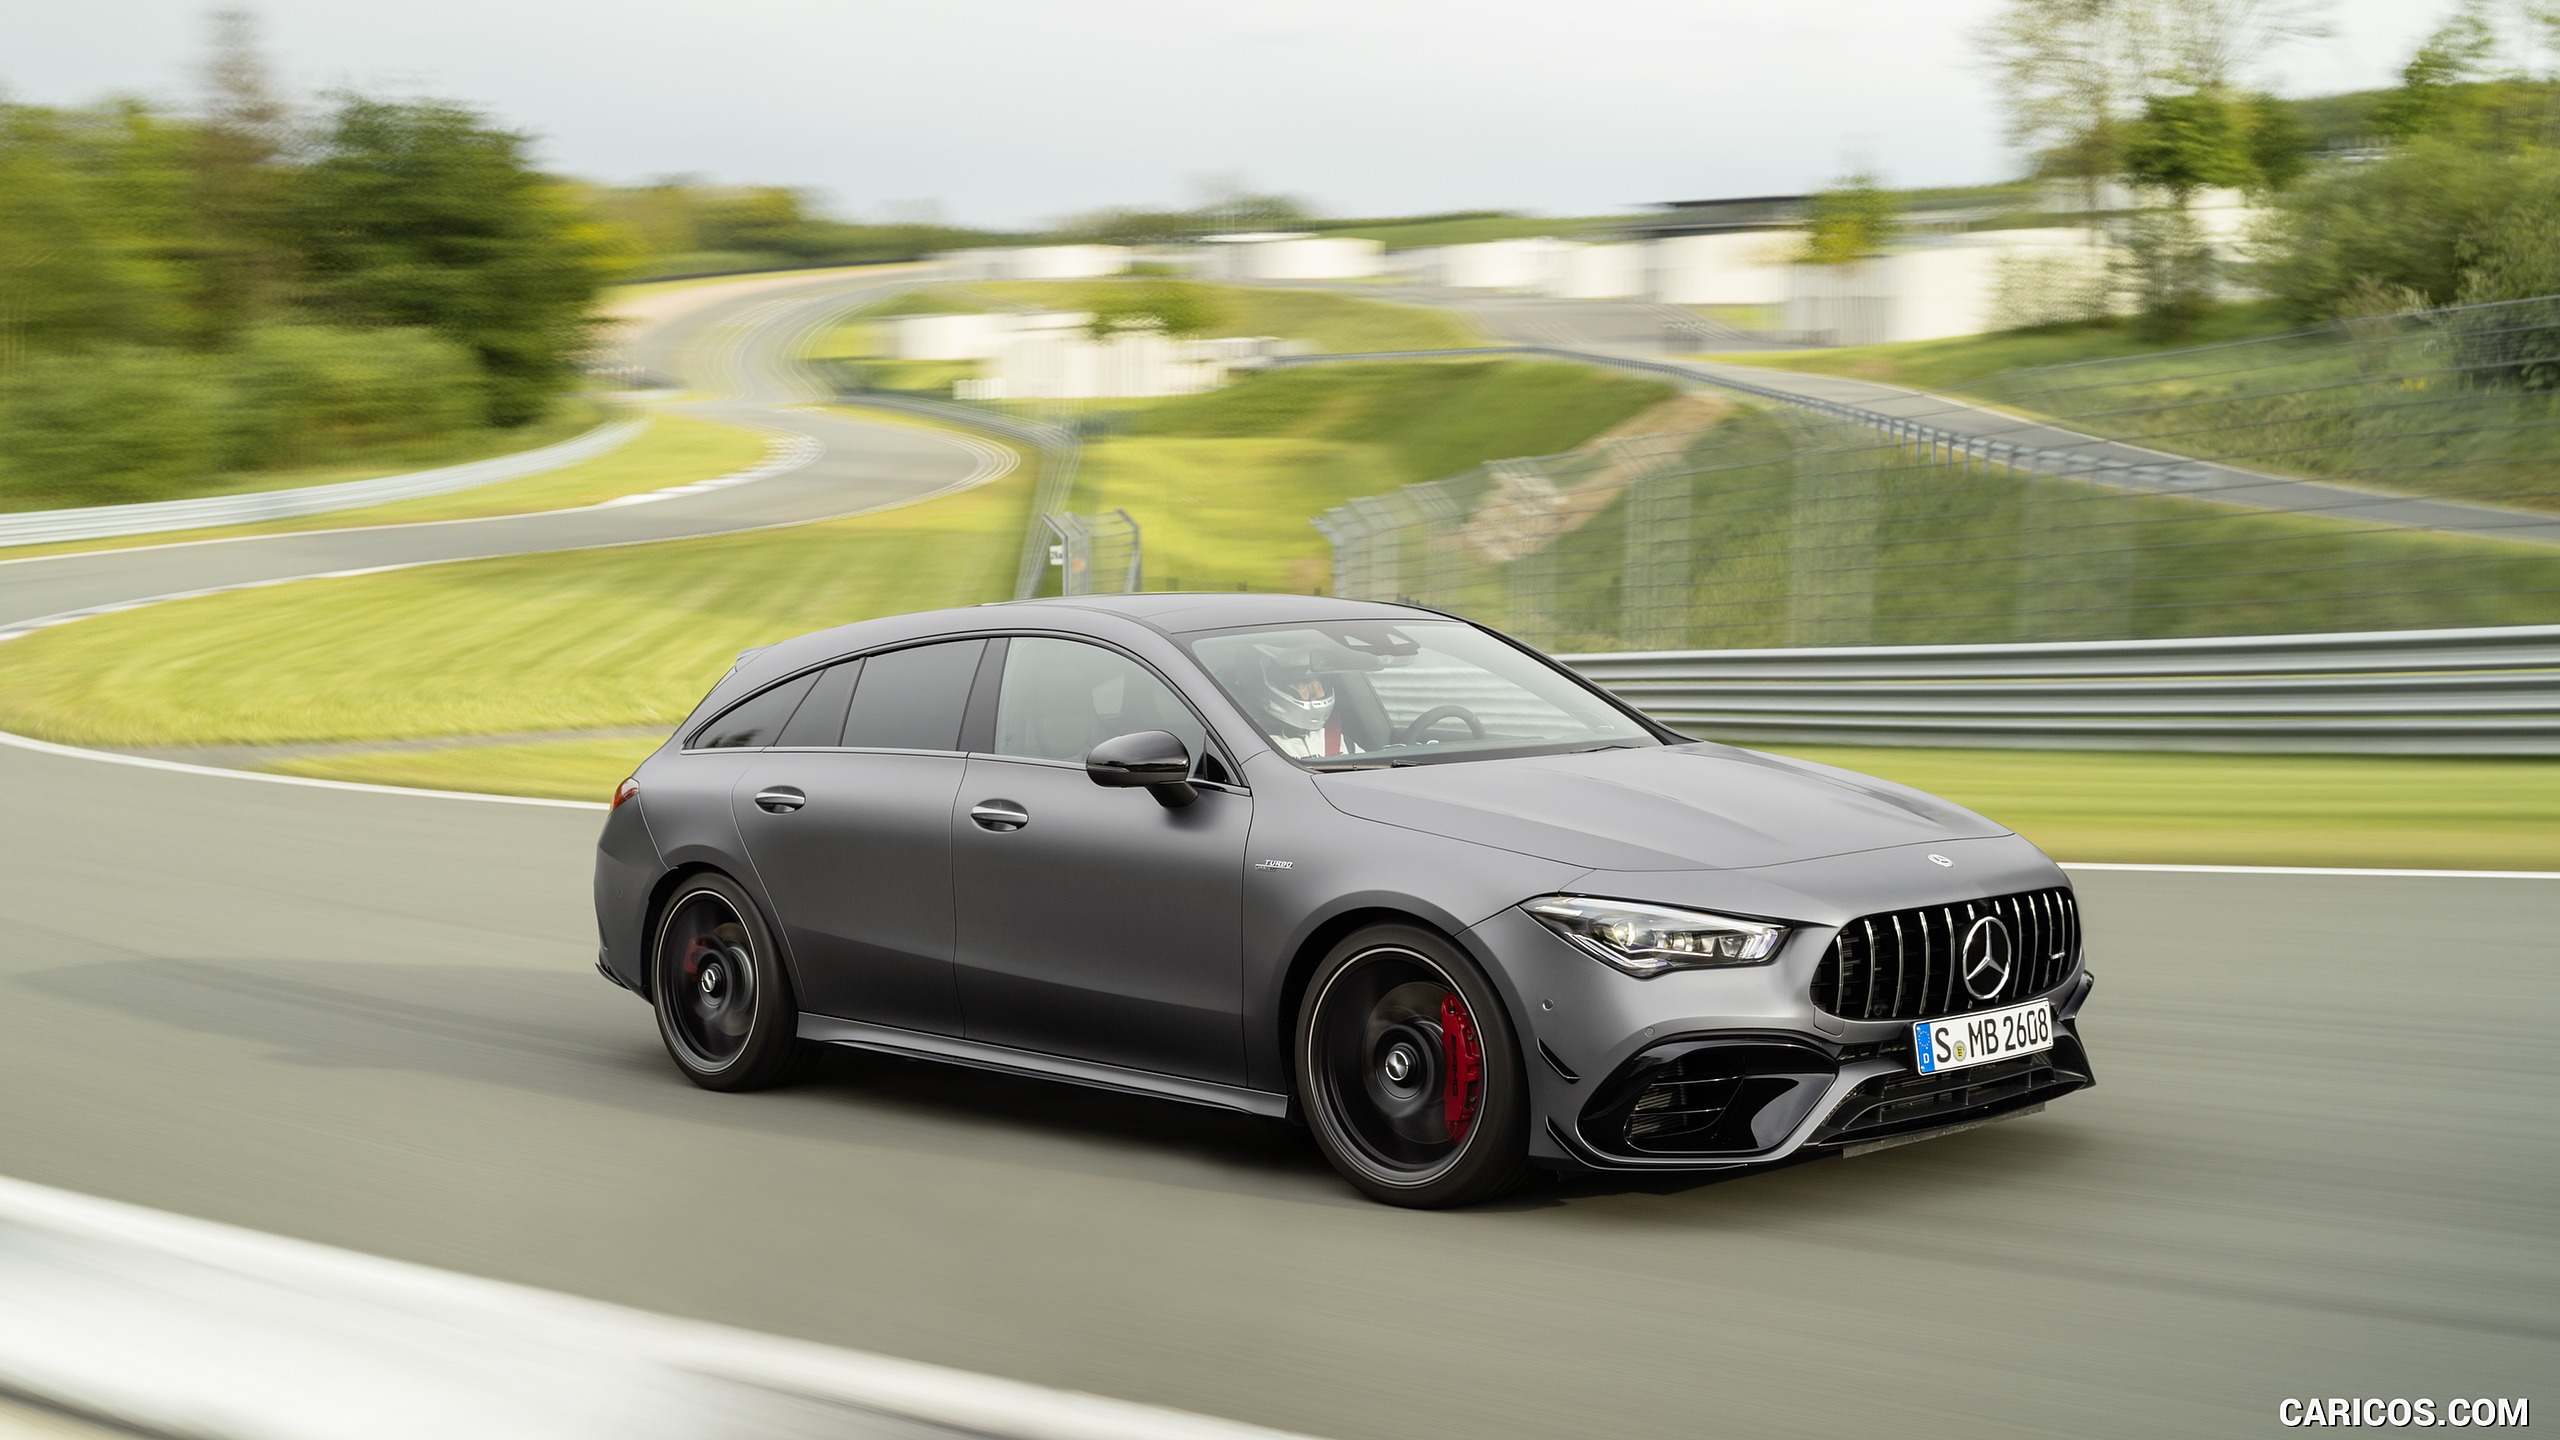 2020 Mercedes-AMG CLA 45 S 4MATIC+ Shooting Brake - Front Three-Quarter, #1 of 35